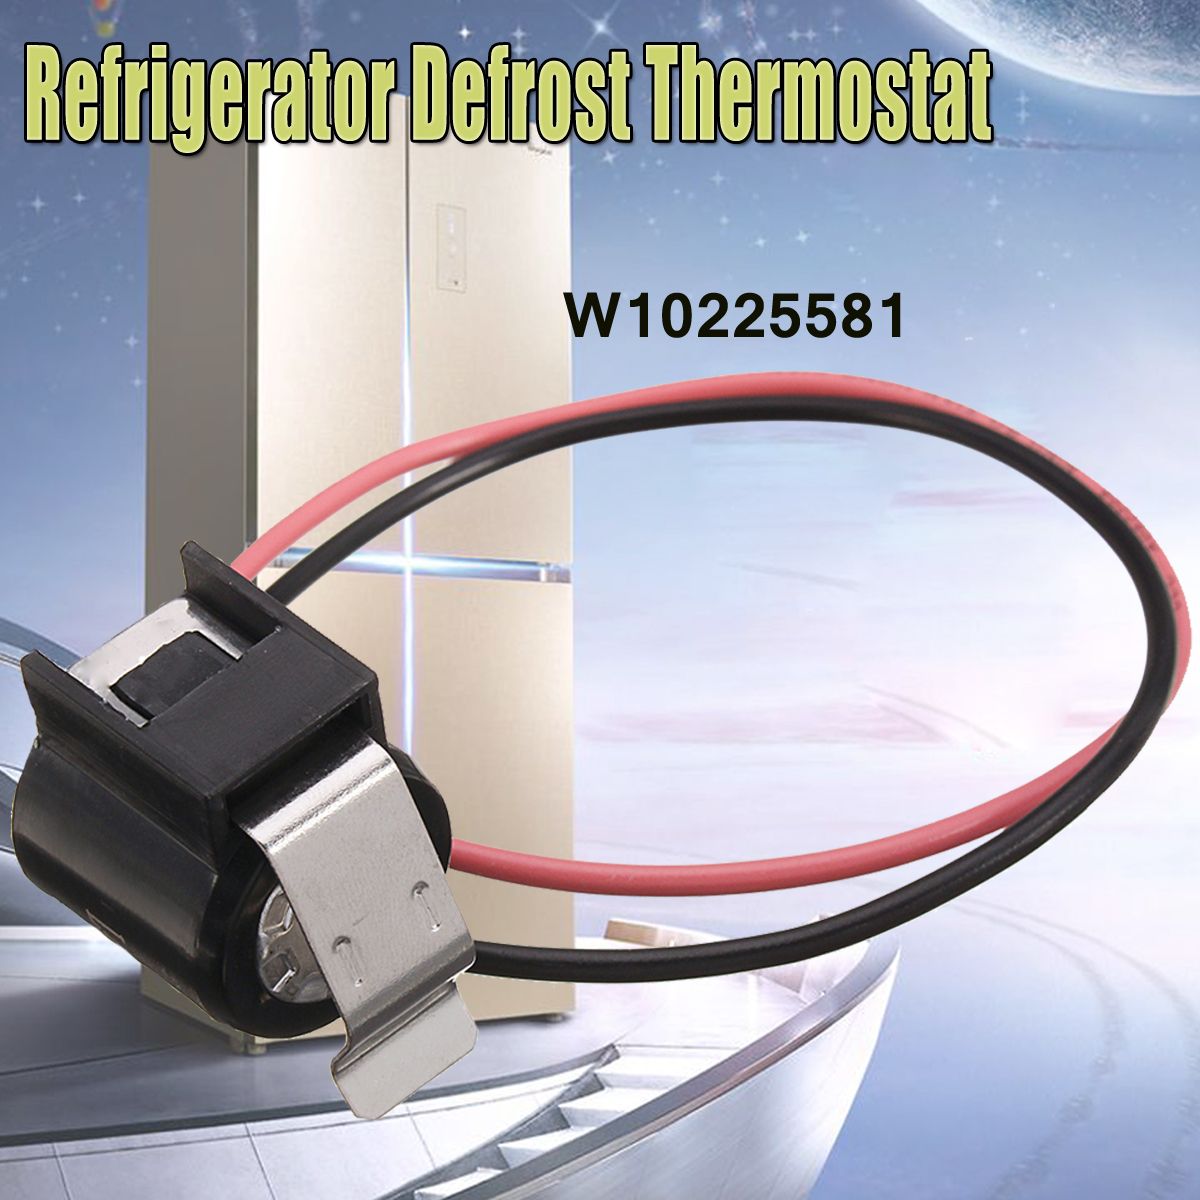 Refrigerator-Defrost-Thermostat-Replacement-For-Whirlpool-Kenmore-W10225581-1364764